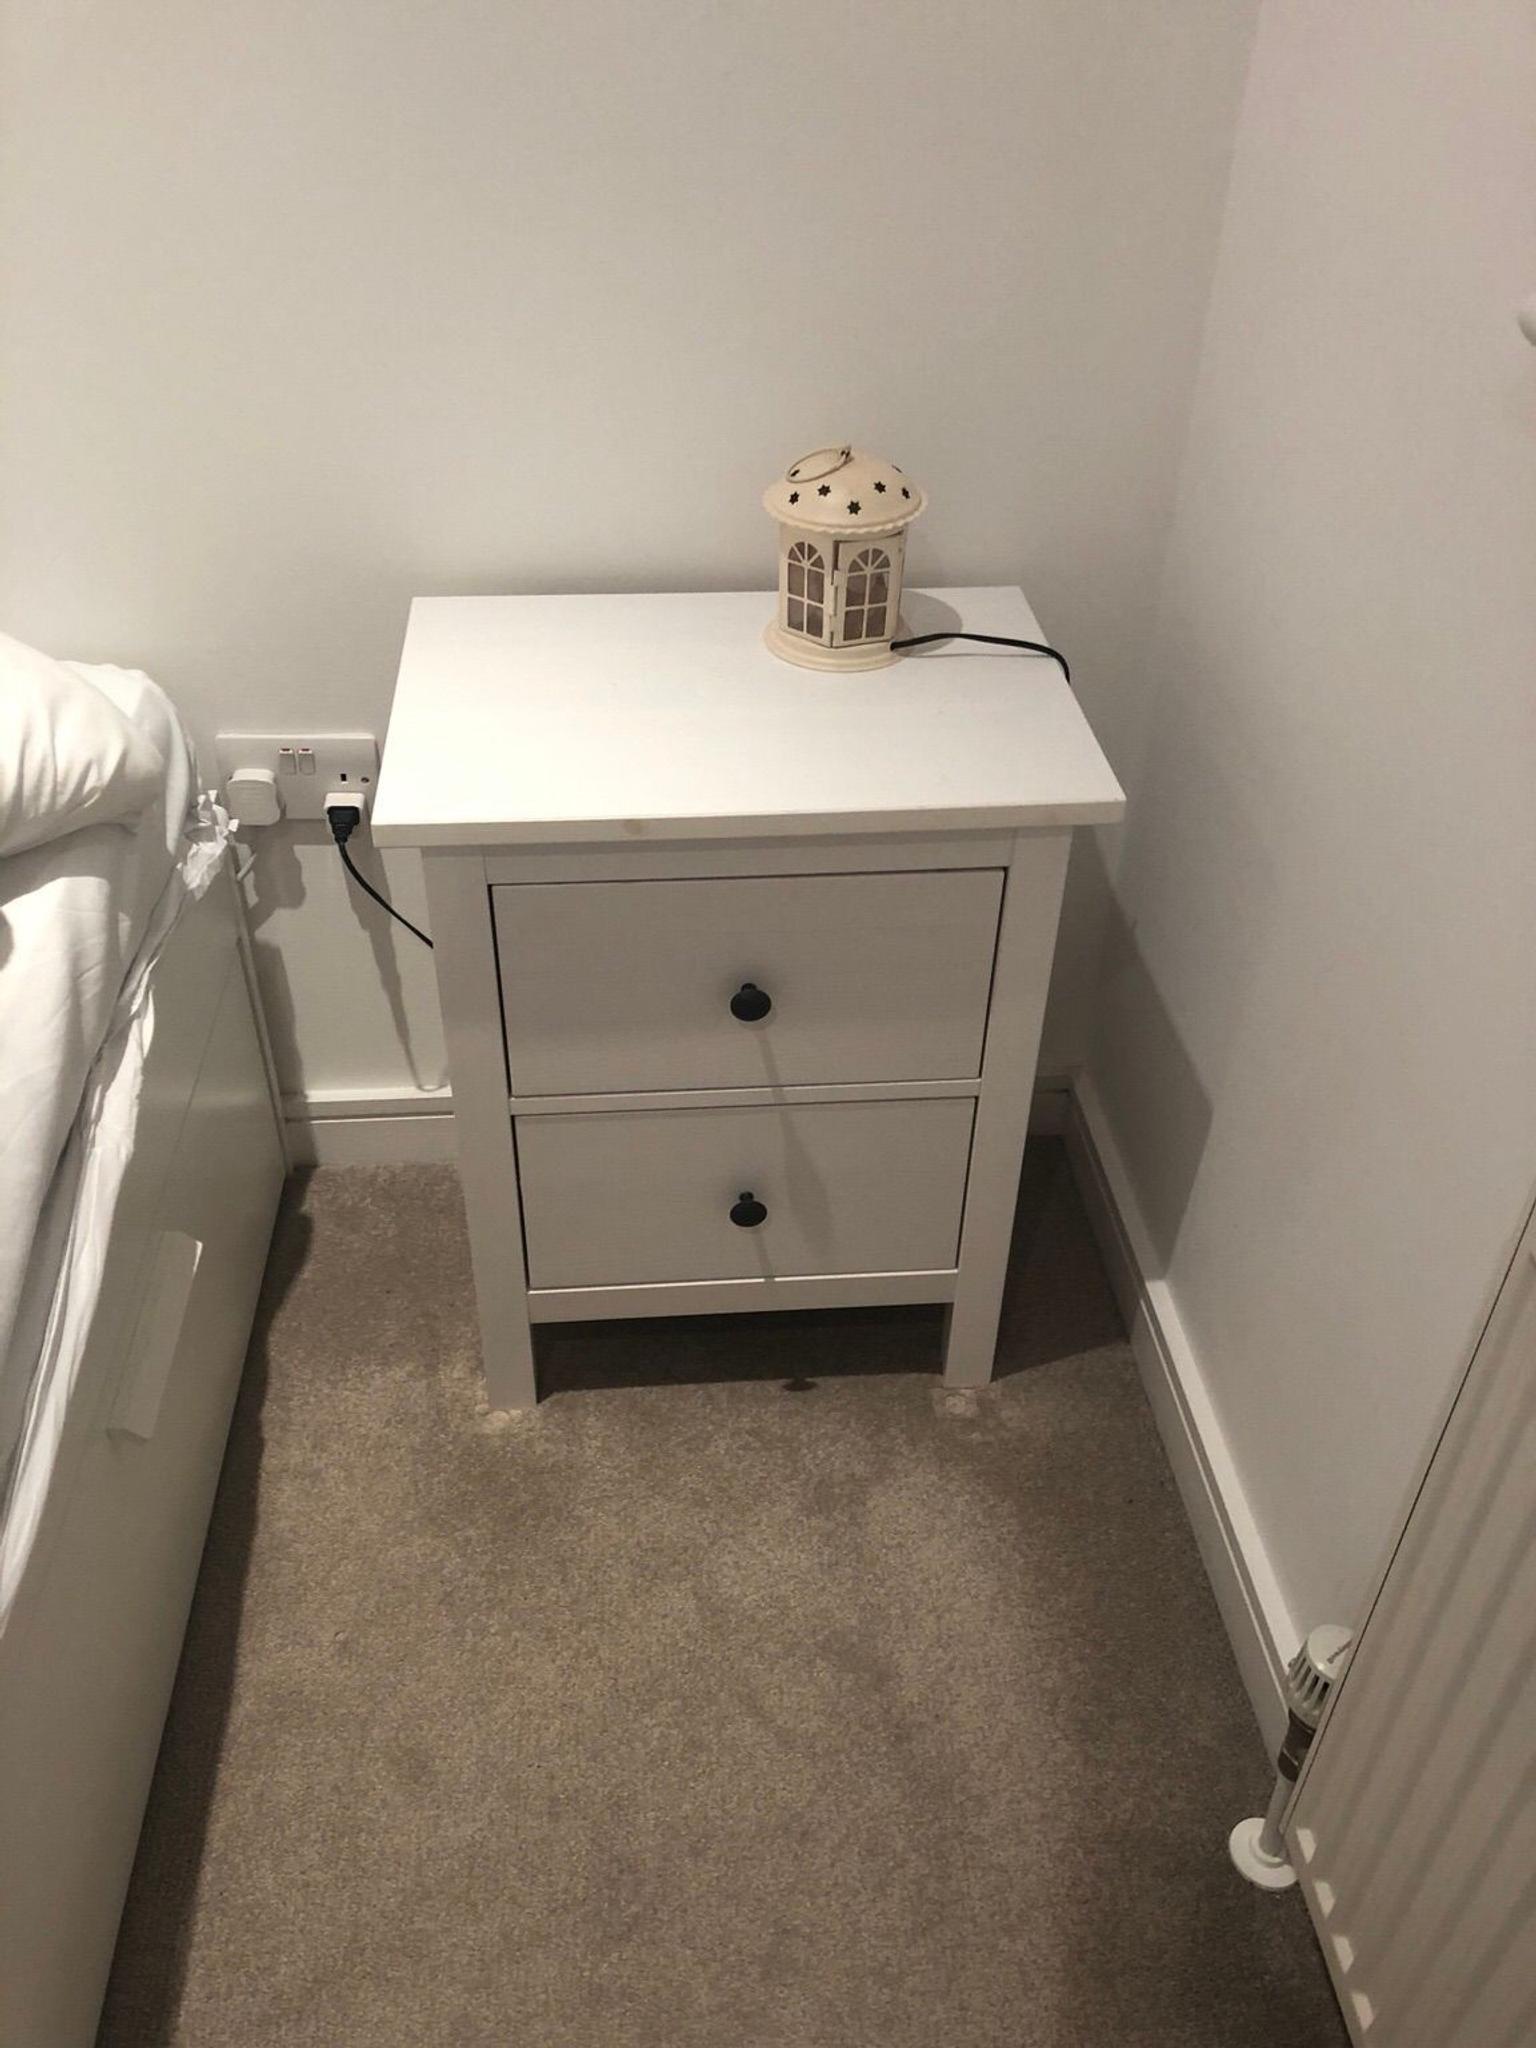 2 X Ikea Hemnes Chest Of 2 White Drawers In Sw1v Westminster Fur